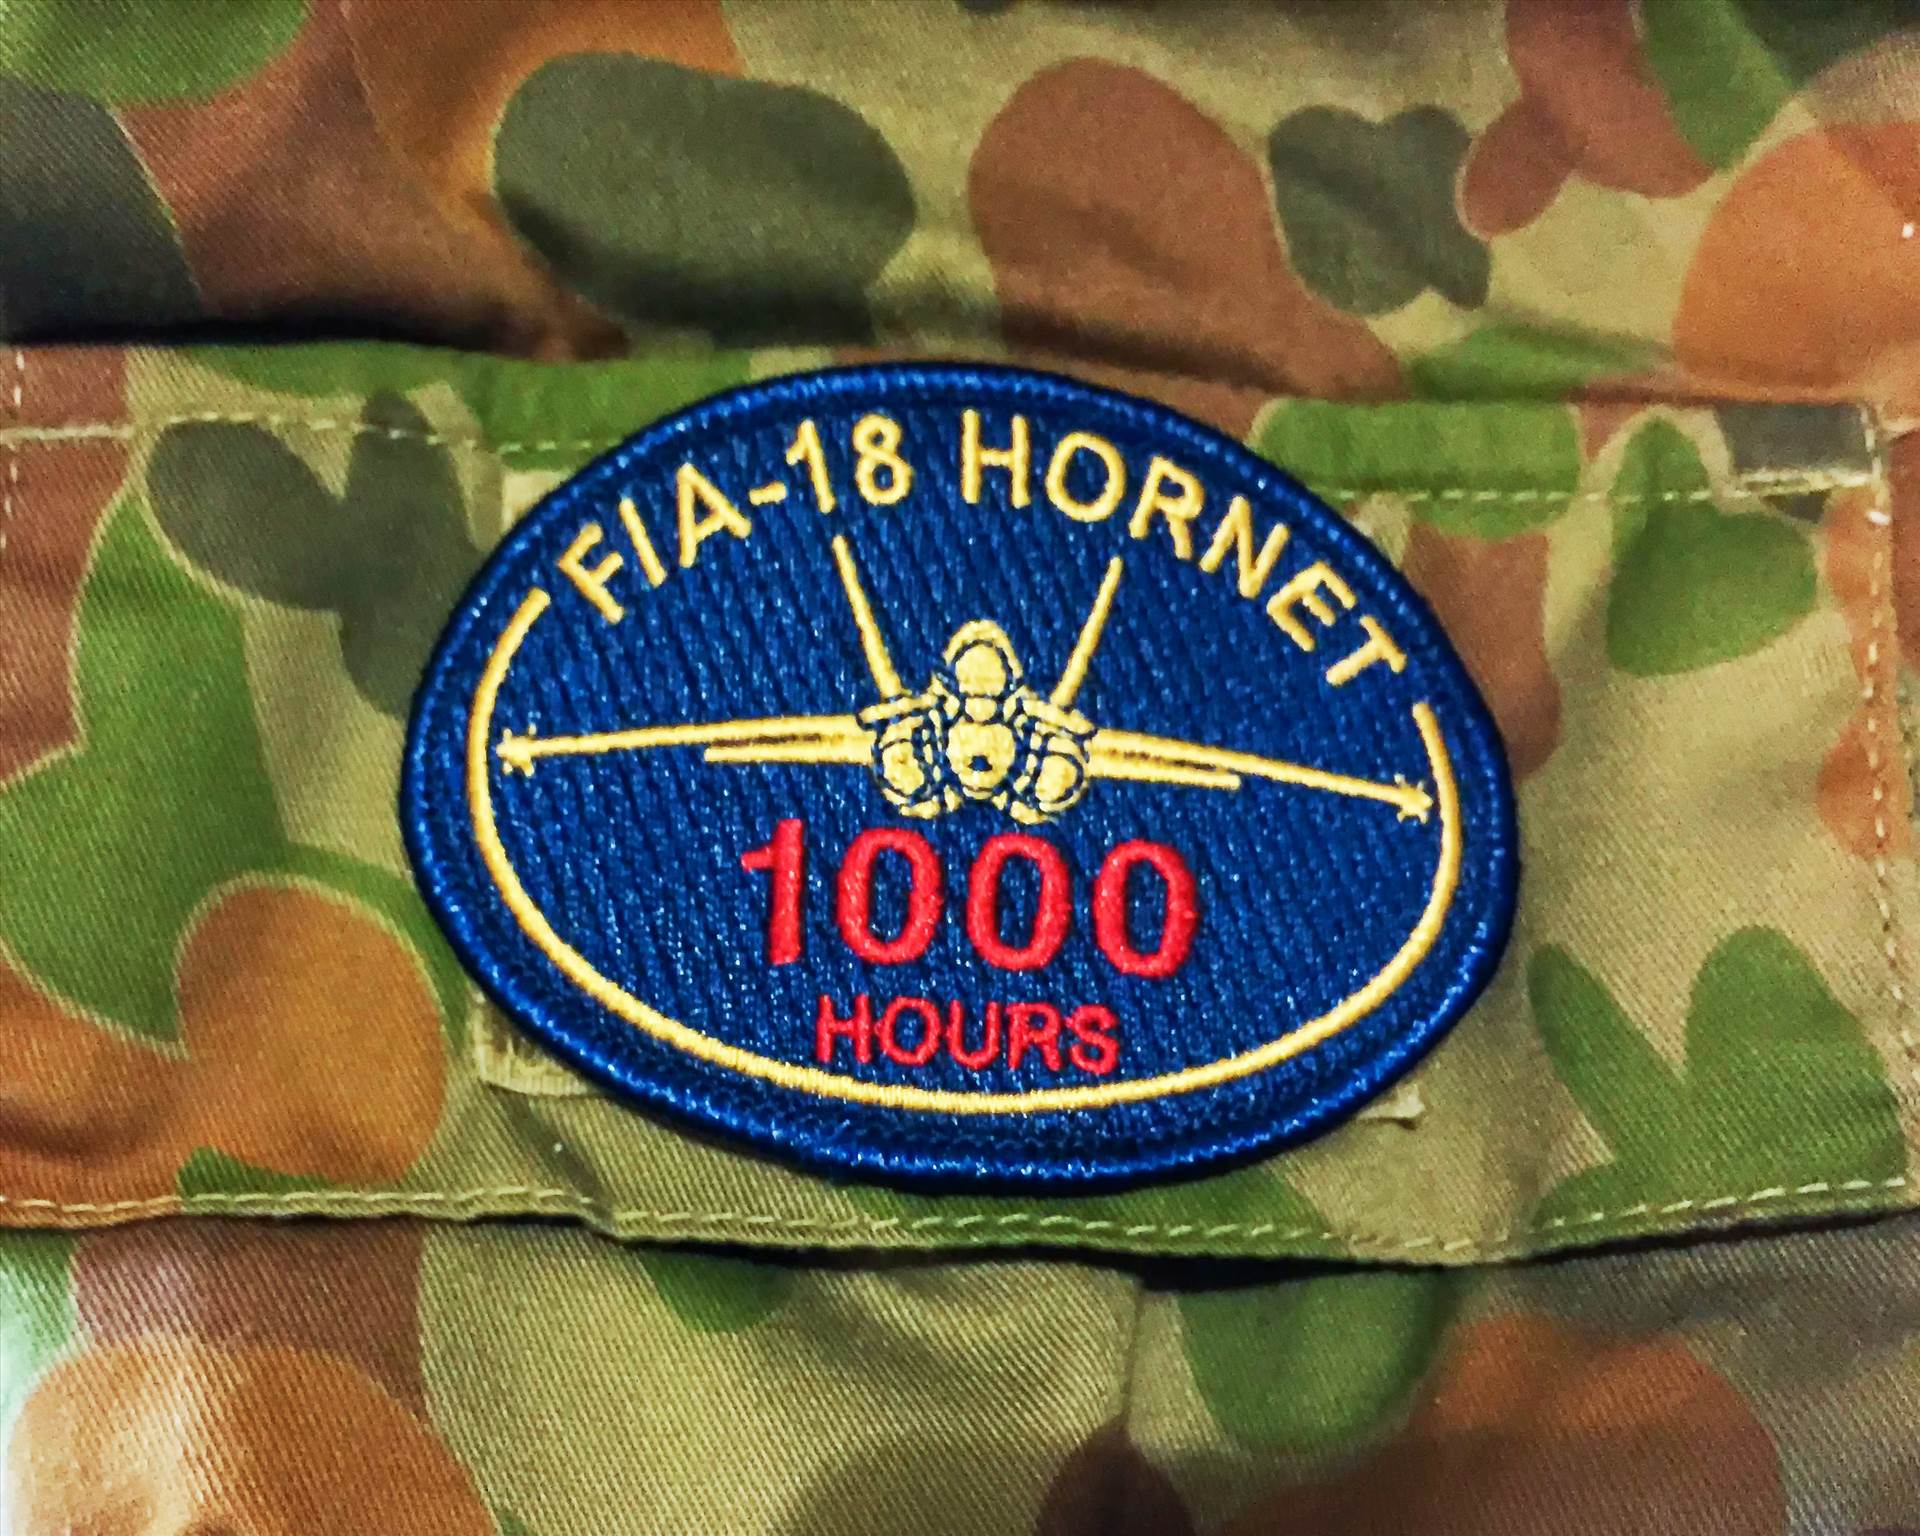 F/A-18 HORNET  F/A-18 HORNET PATCH 1000 HOURS by johntorcasio